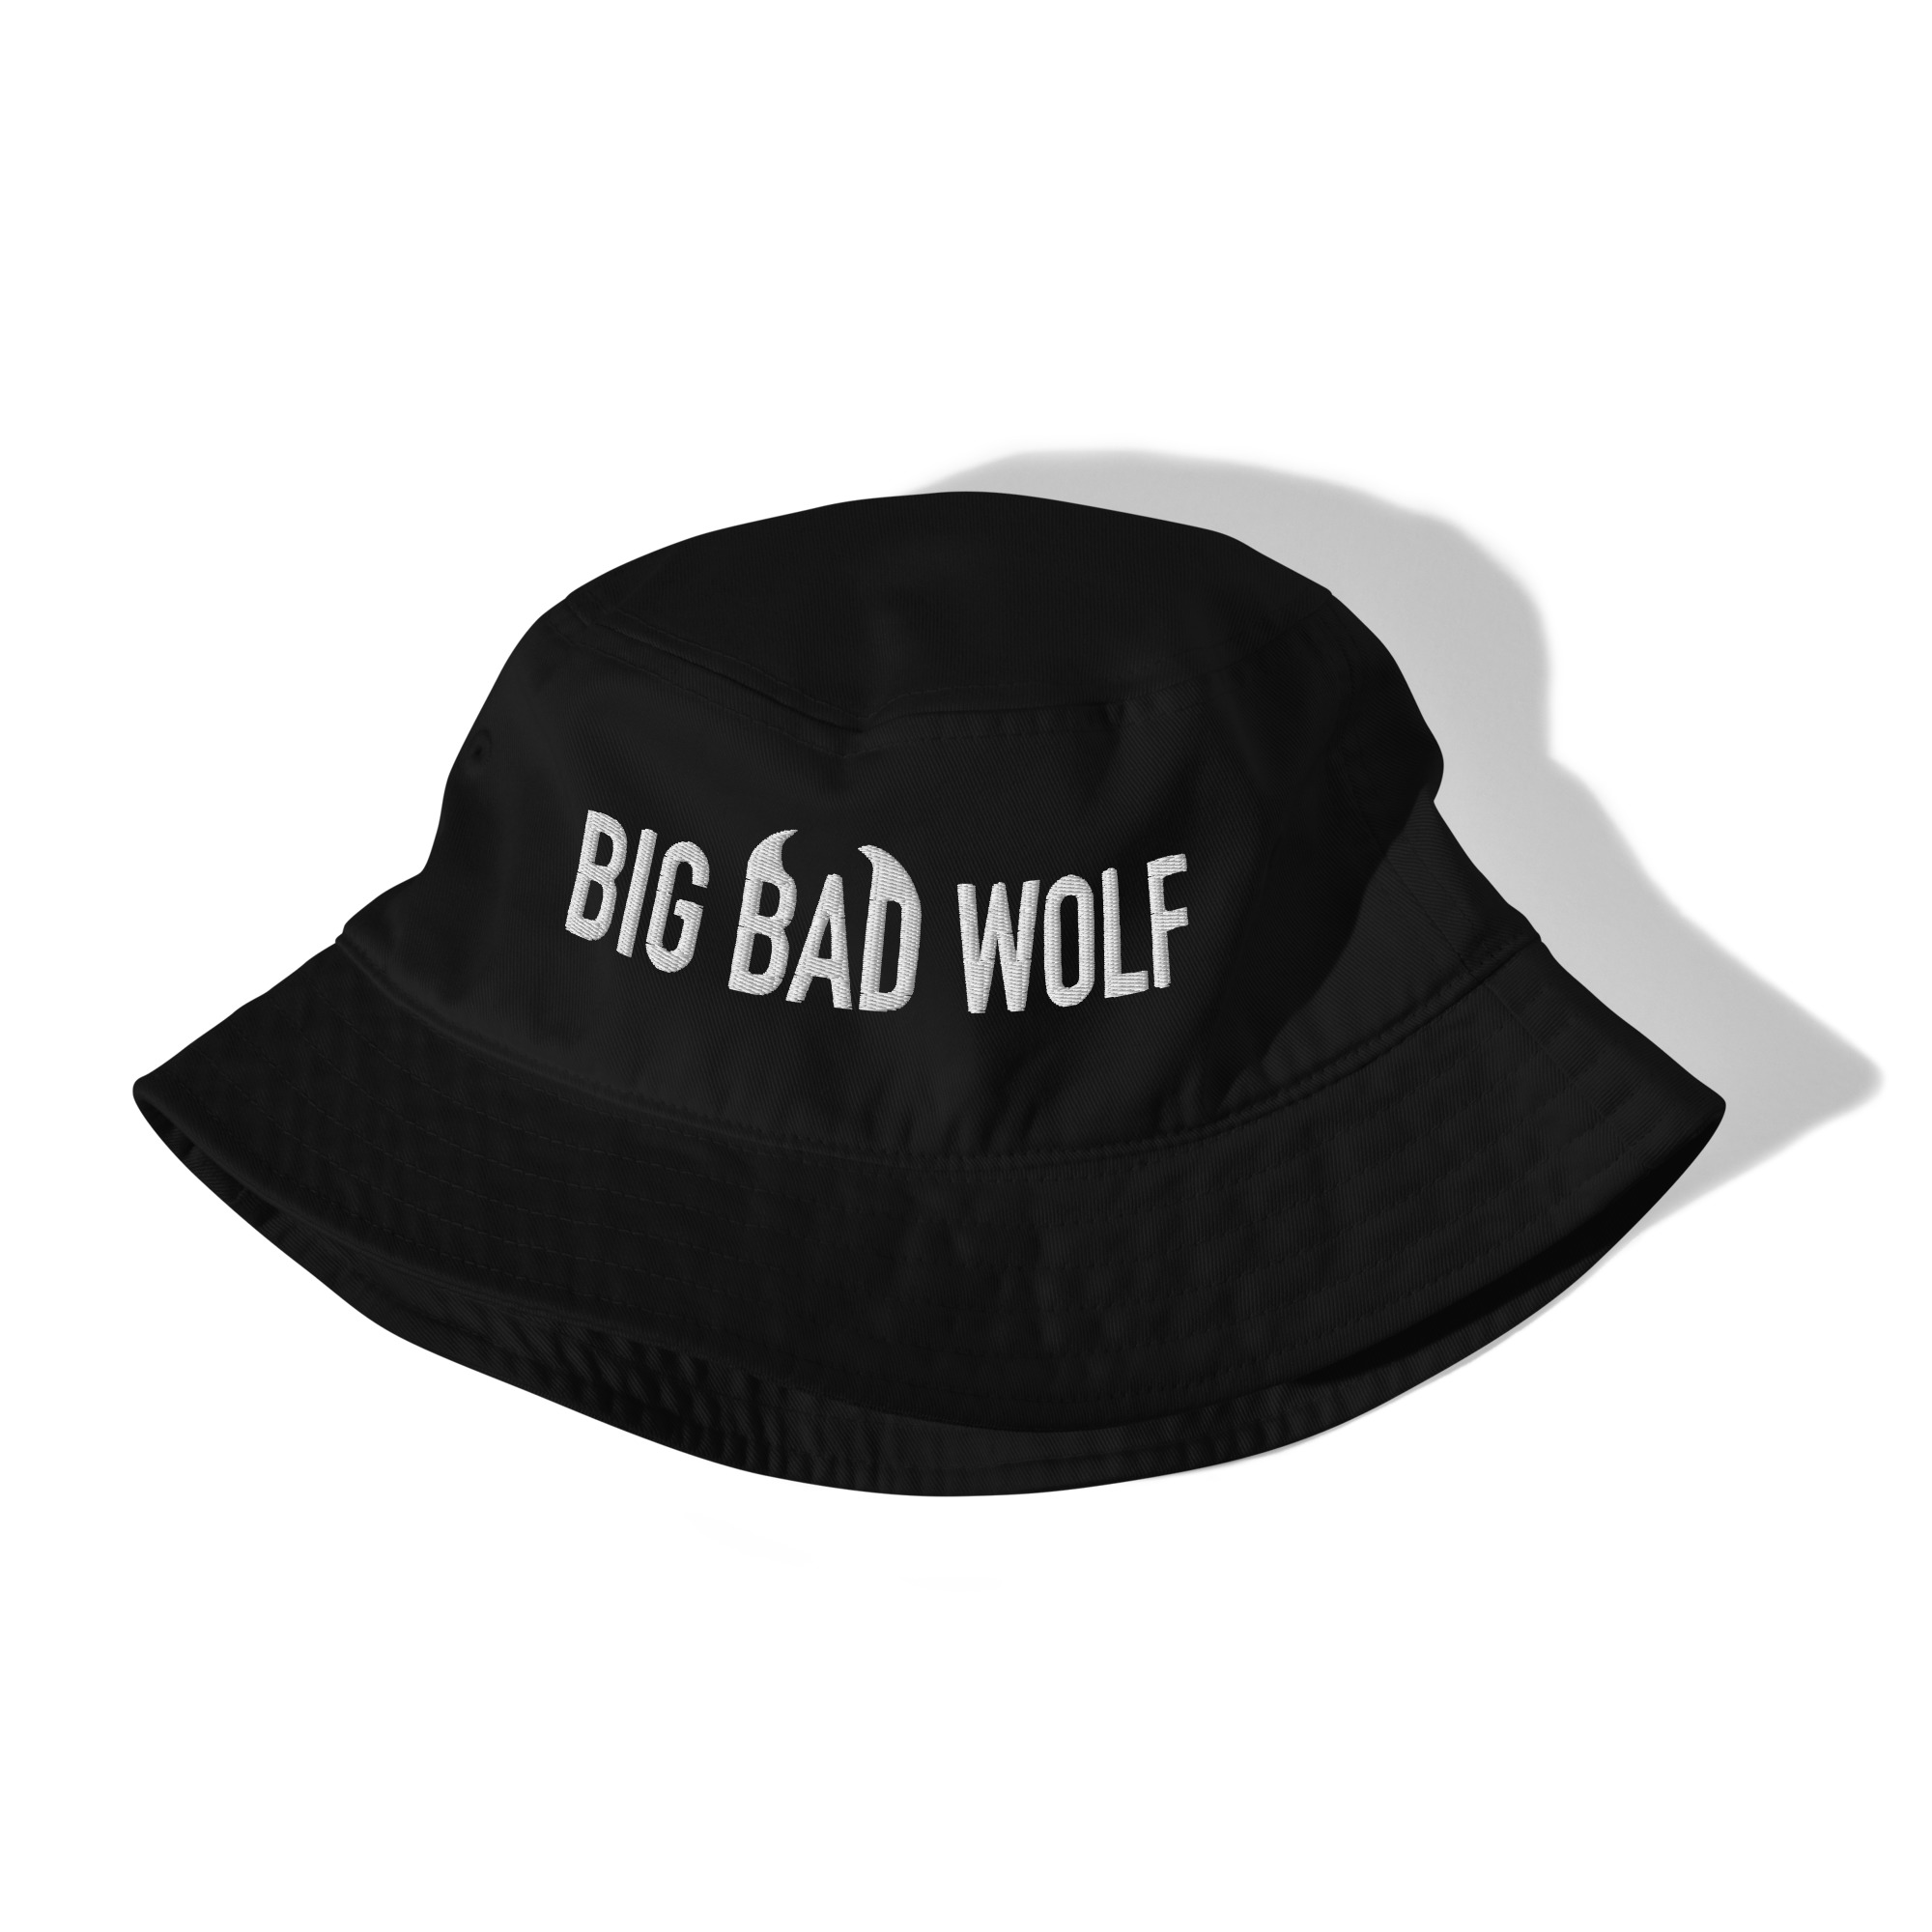 Featured image for “Big Bad Wolf - Organic bucket hat”